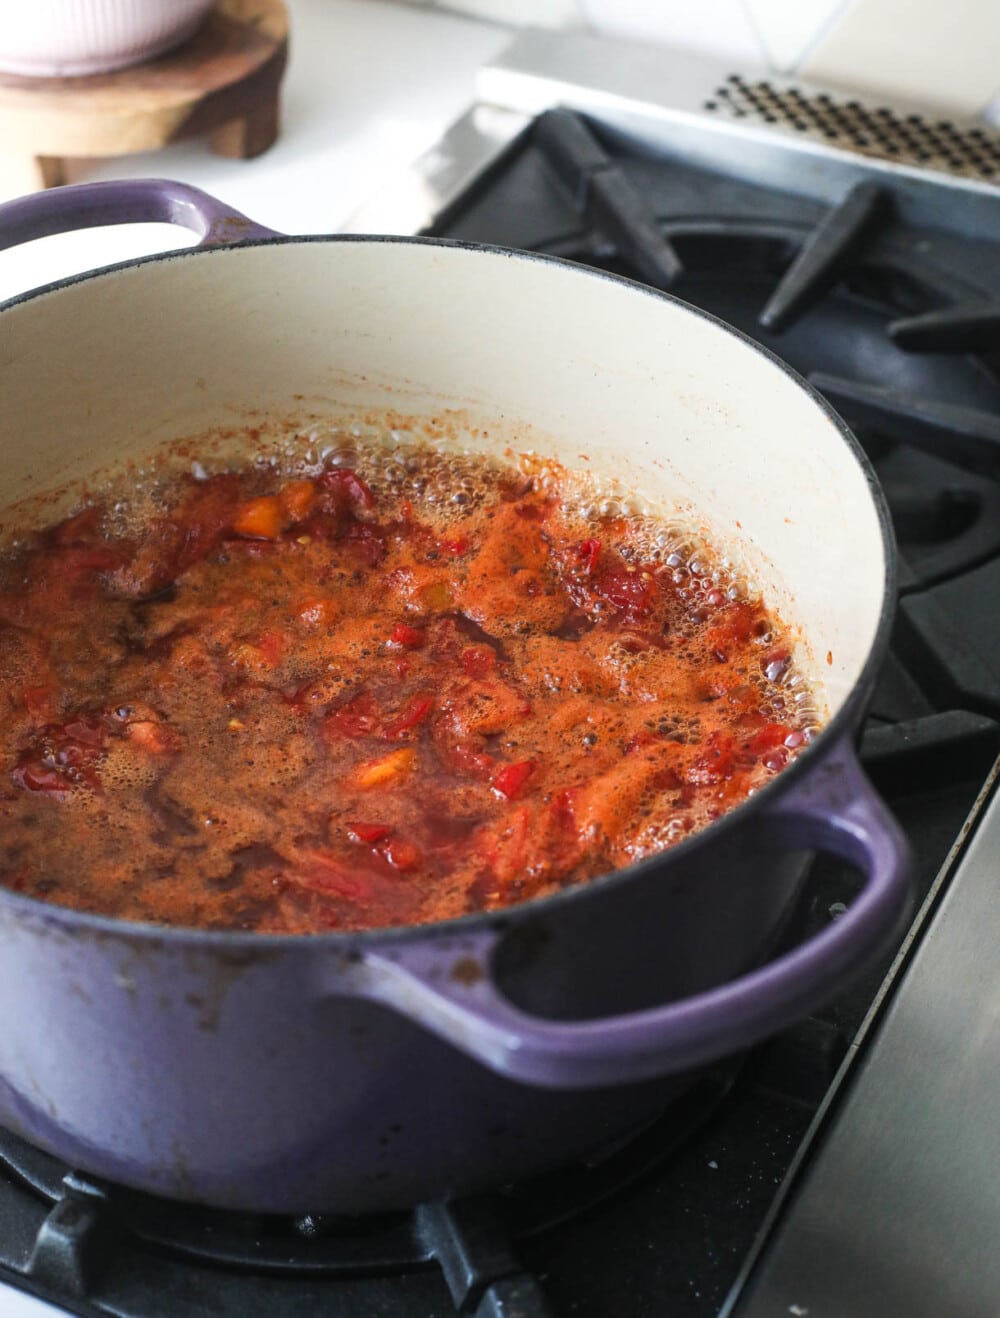 tomato jam simmering on the stove in a purple handled pot